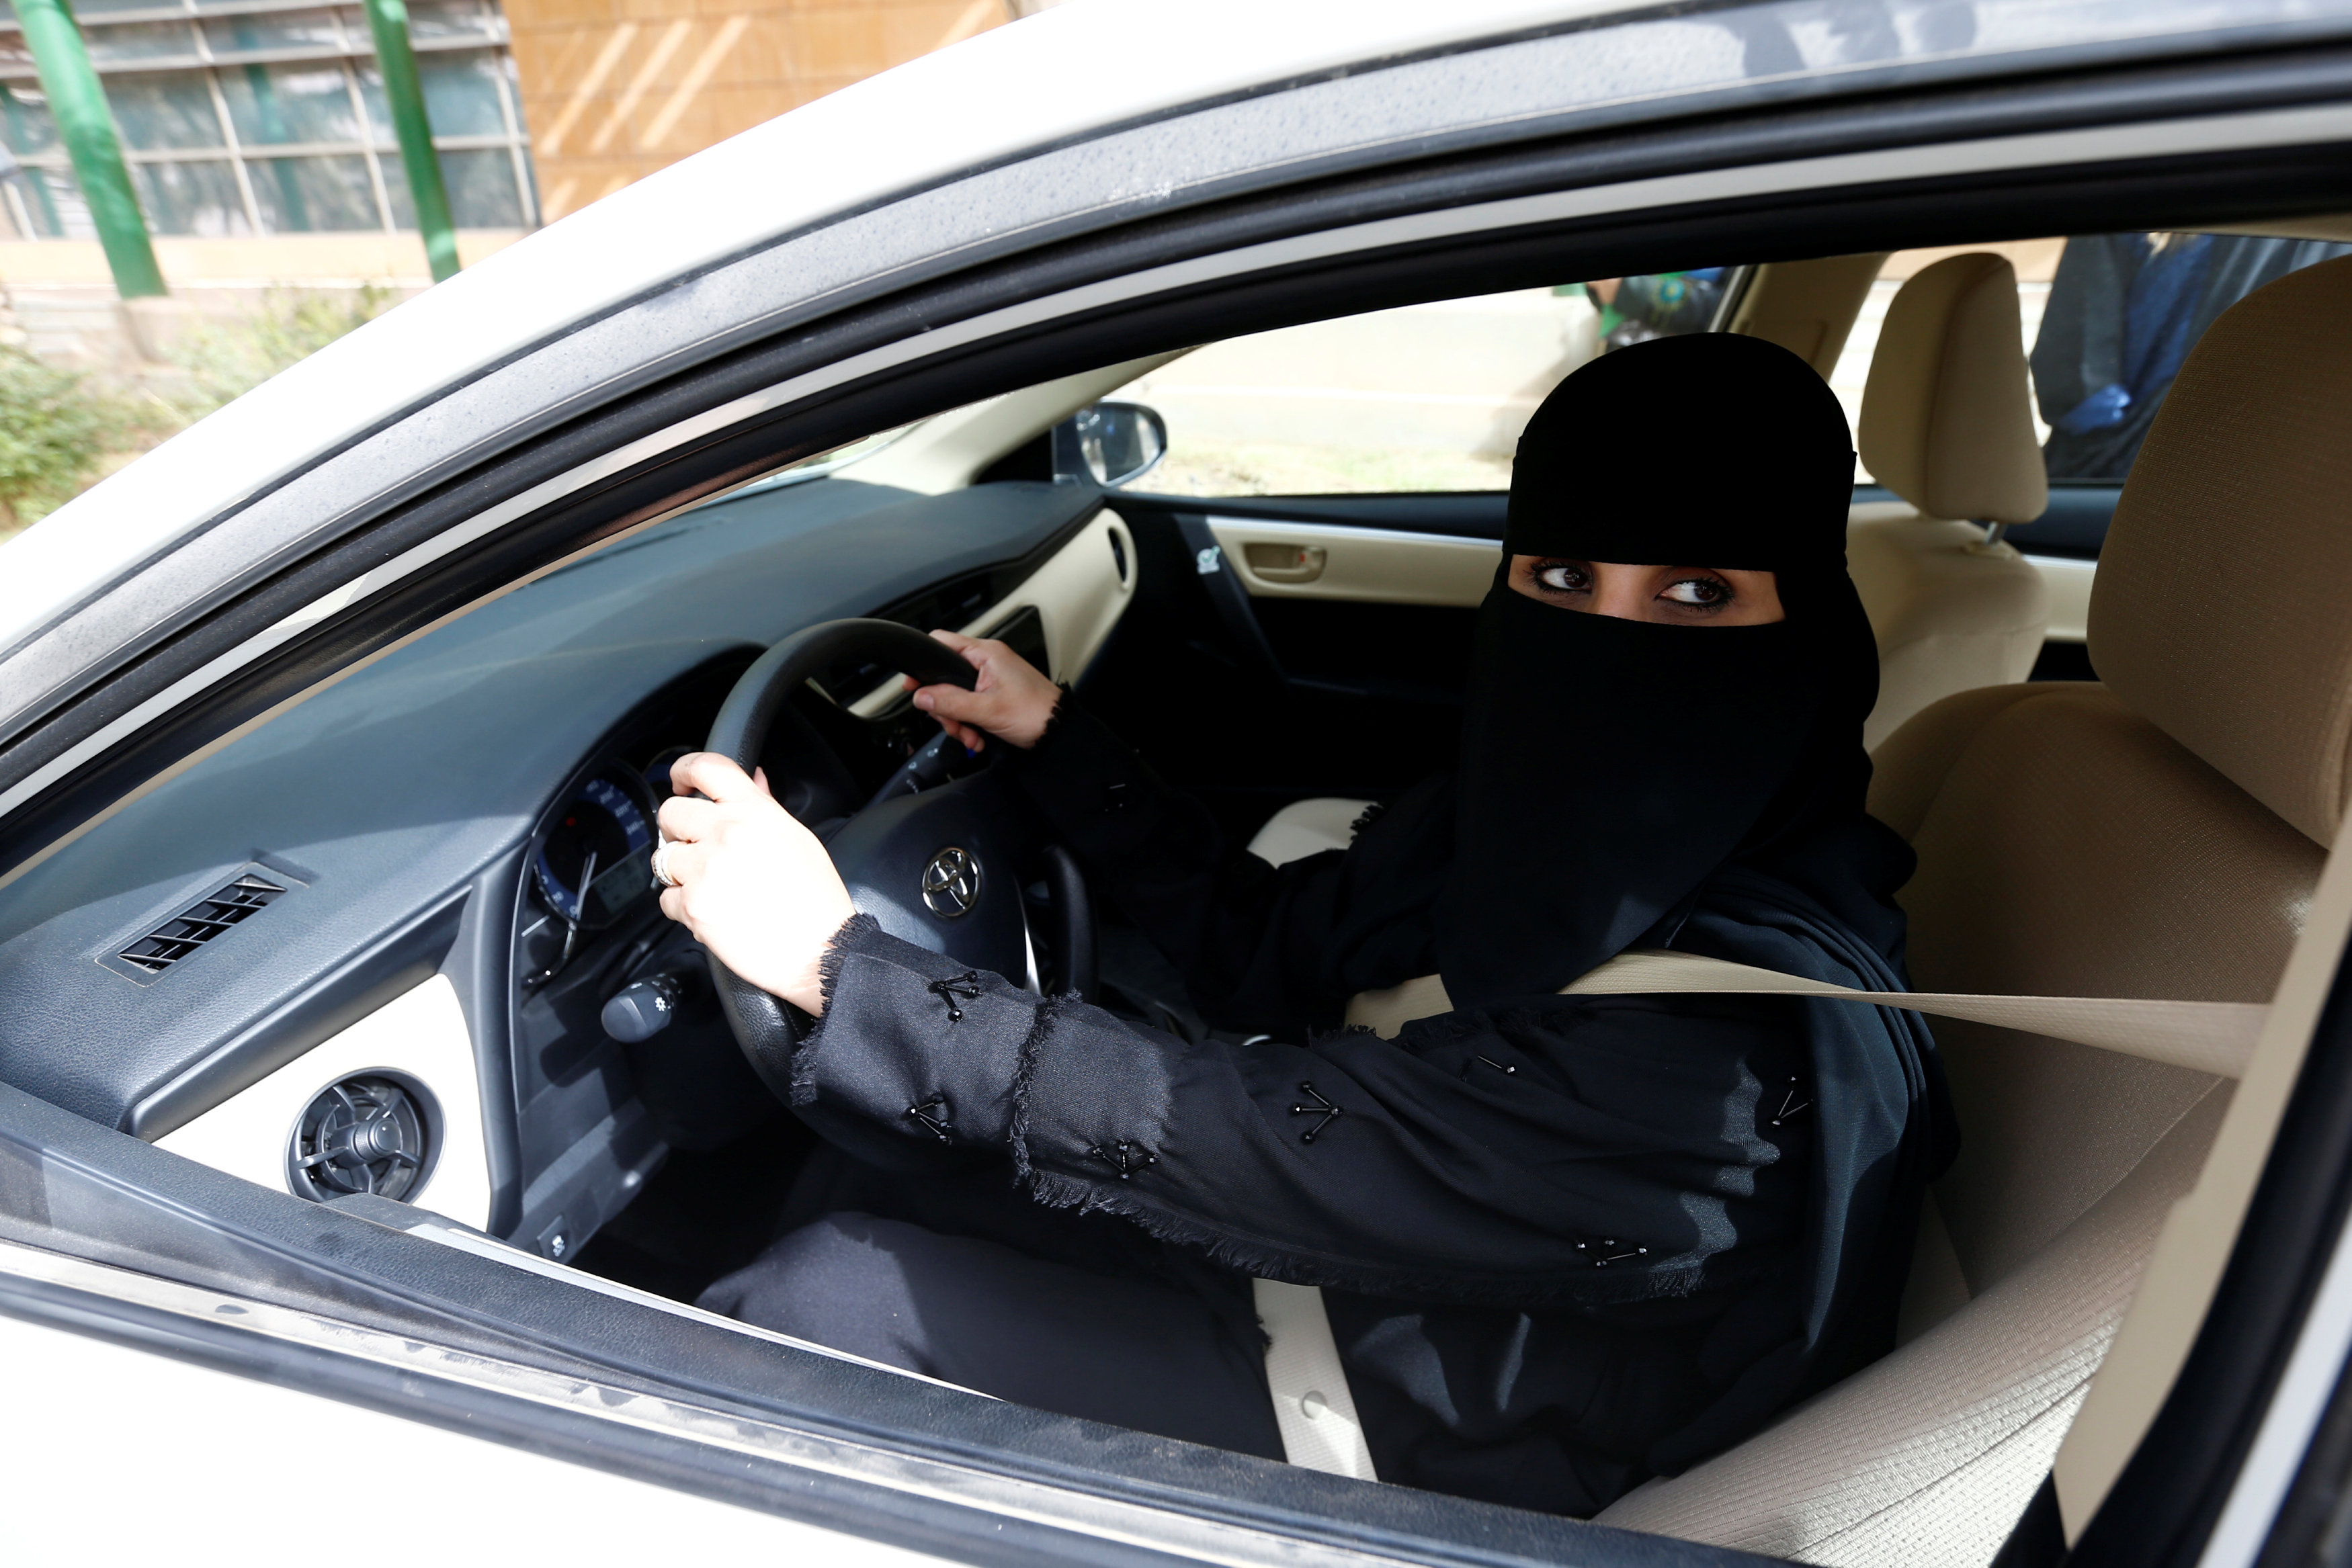 Saudi women gear up for new freedom as driving ban ends